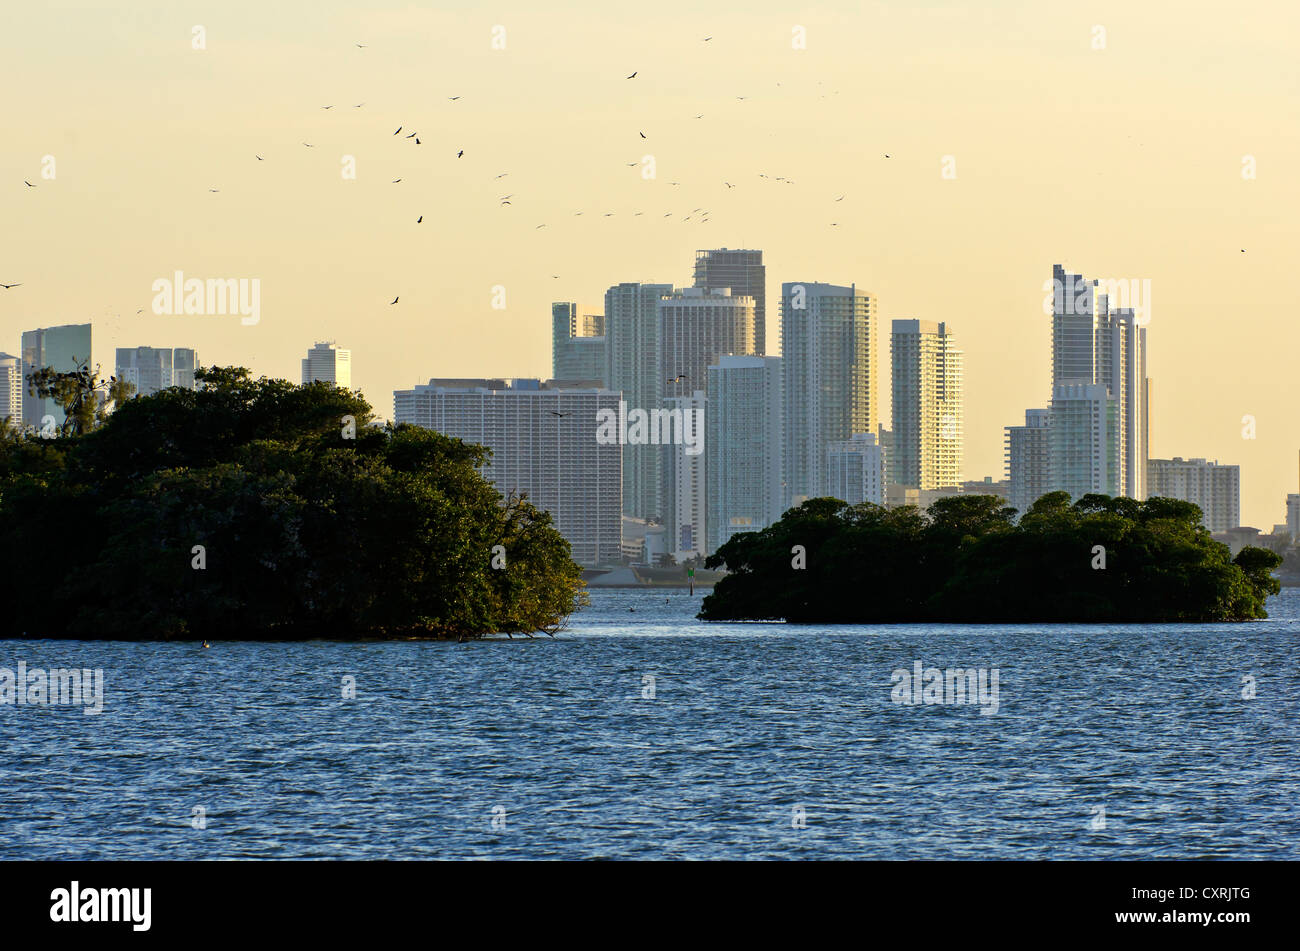 Housing complex at Mount Sinai Medical Center with small islands in the foreground, seen from Morningside Park, Miami, Florida Stock Photo